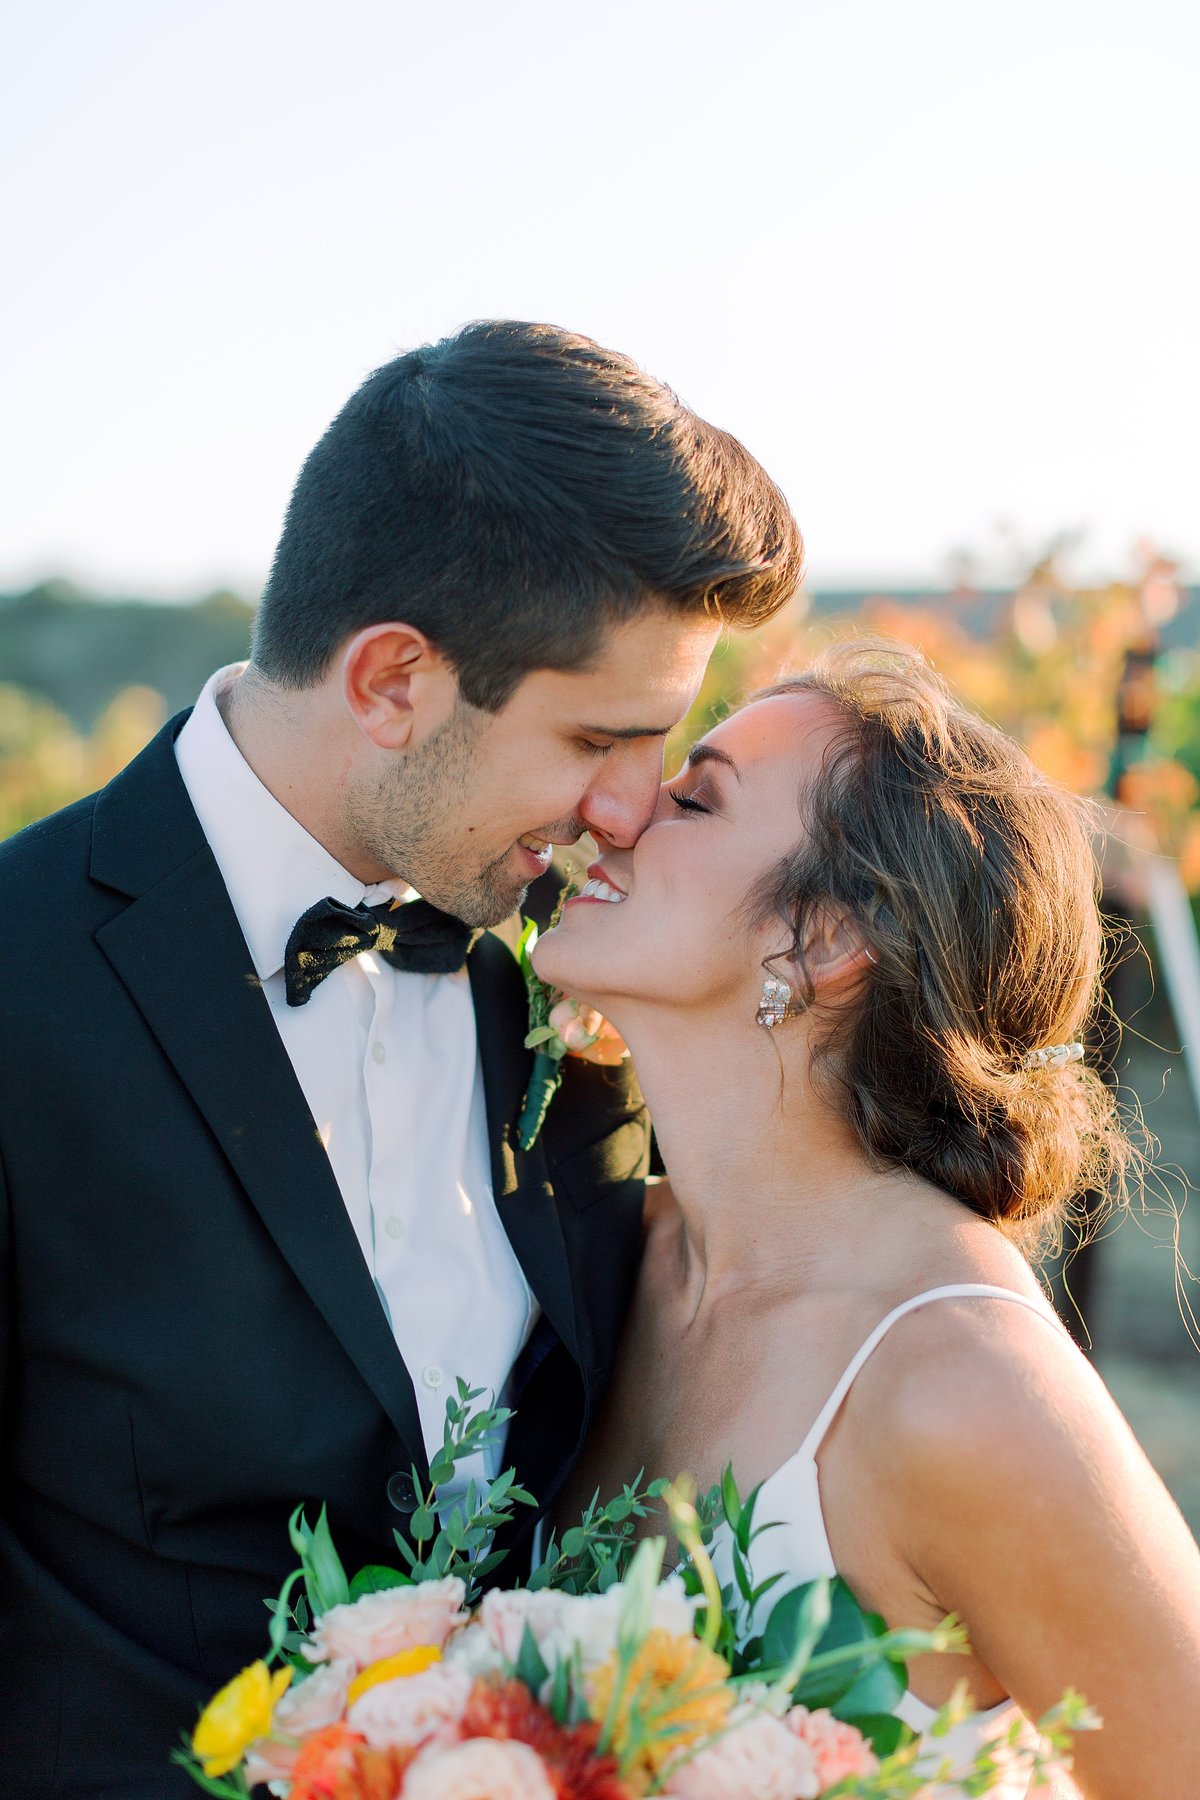 20191020 Modern Elegance Wedding Styled Shoot at Three Steves Winery Livermore_Bethany Picone Photography-159_WEB